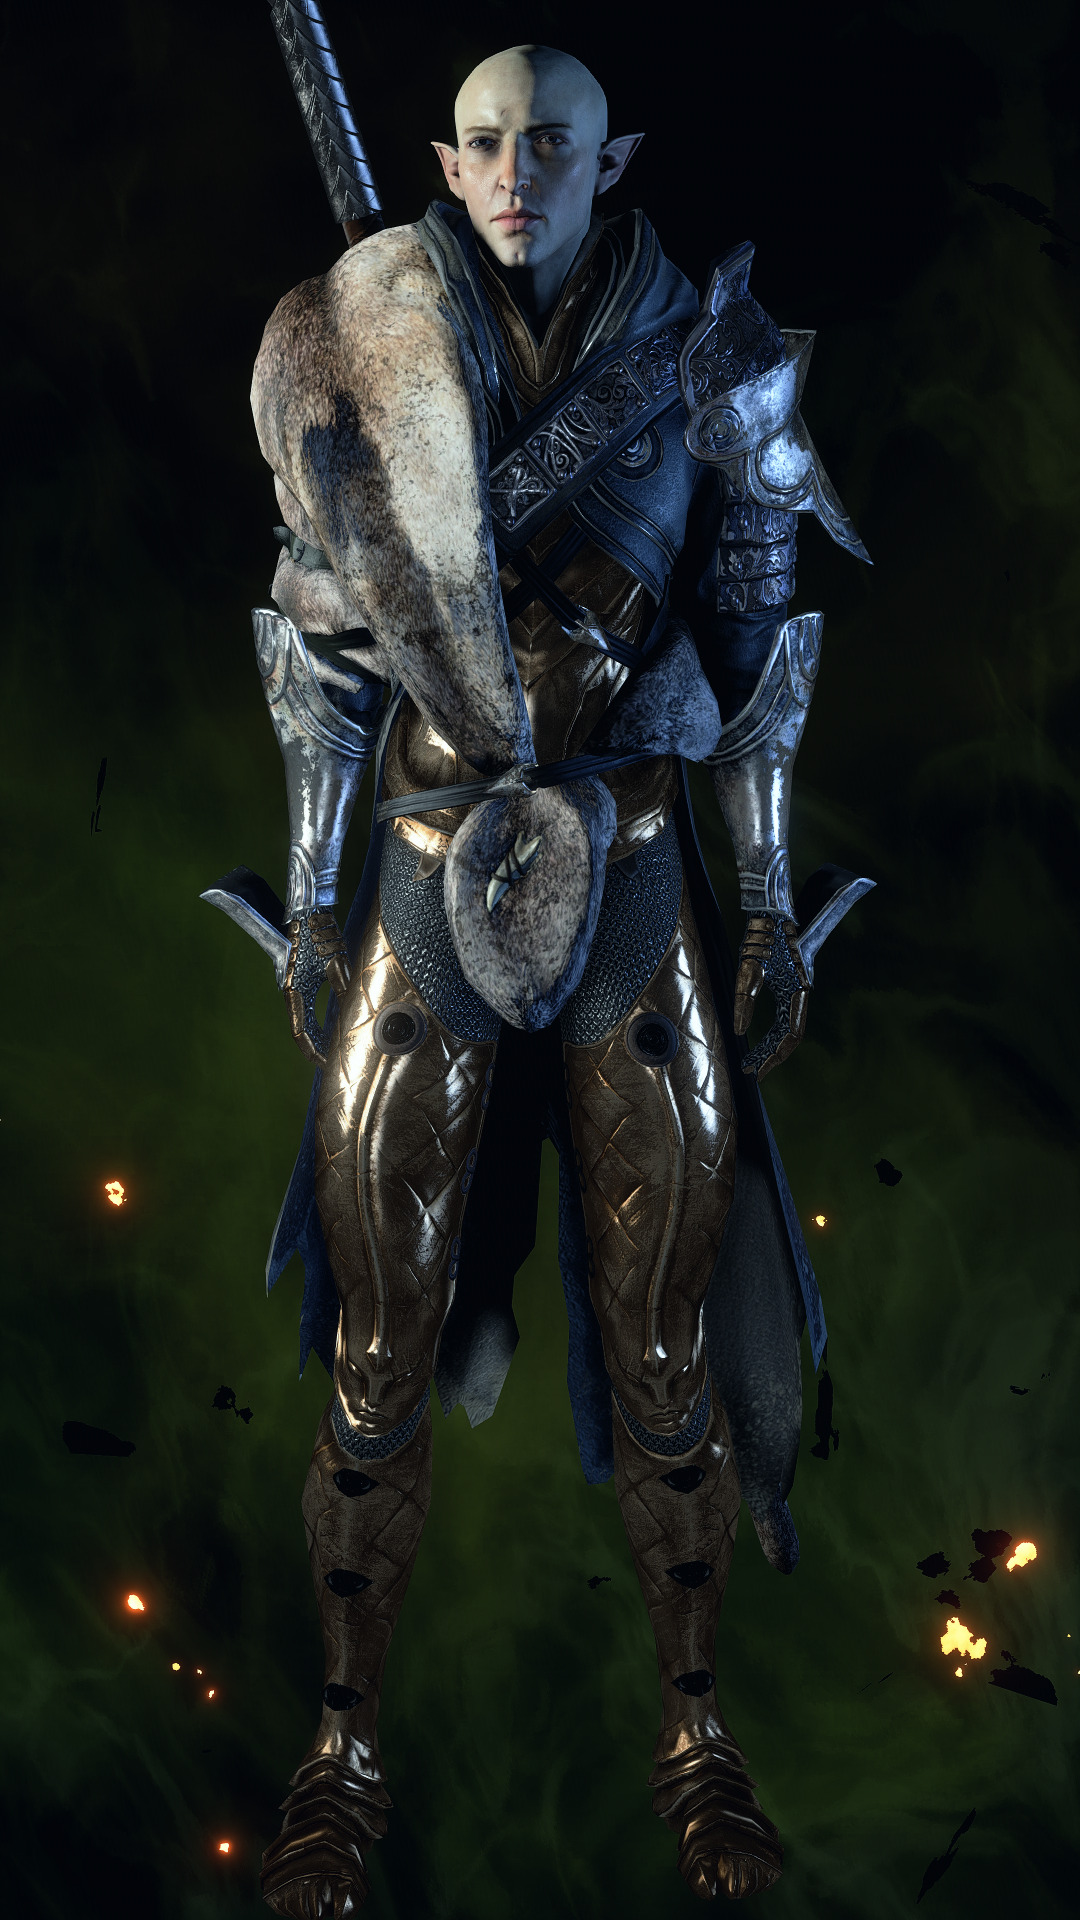 Dragon age solas outfit for boys